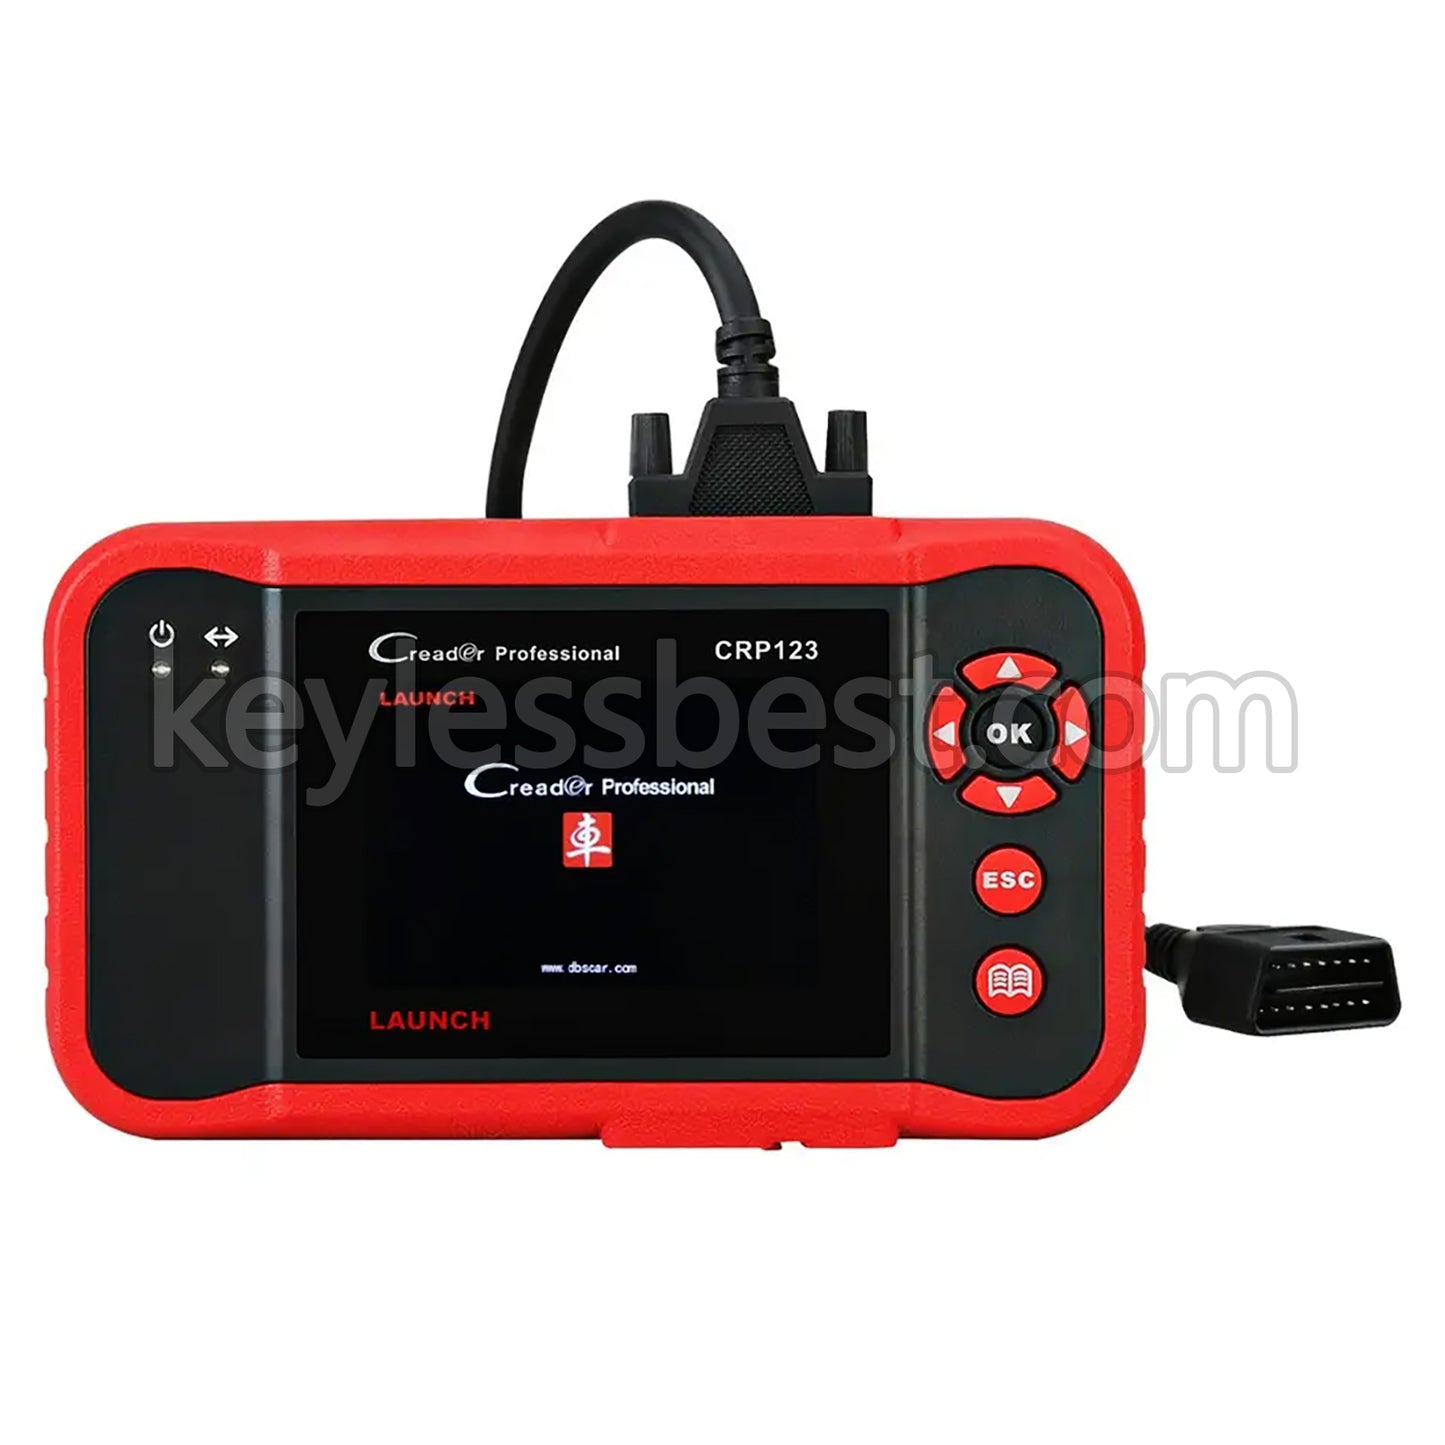 Newer Original vehicles Launc CRP123 diagnostic Tools under Launch Brand Works on ALL 1996 cars Essential details